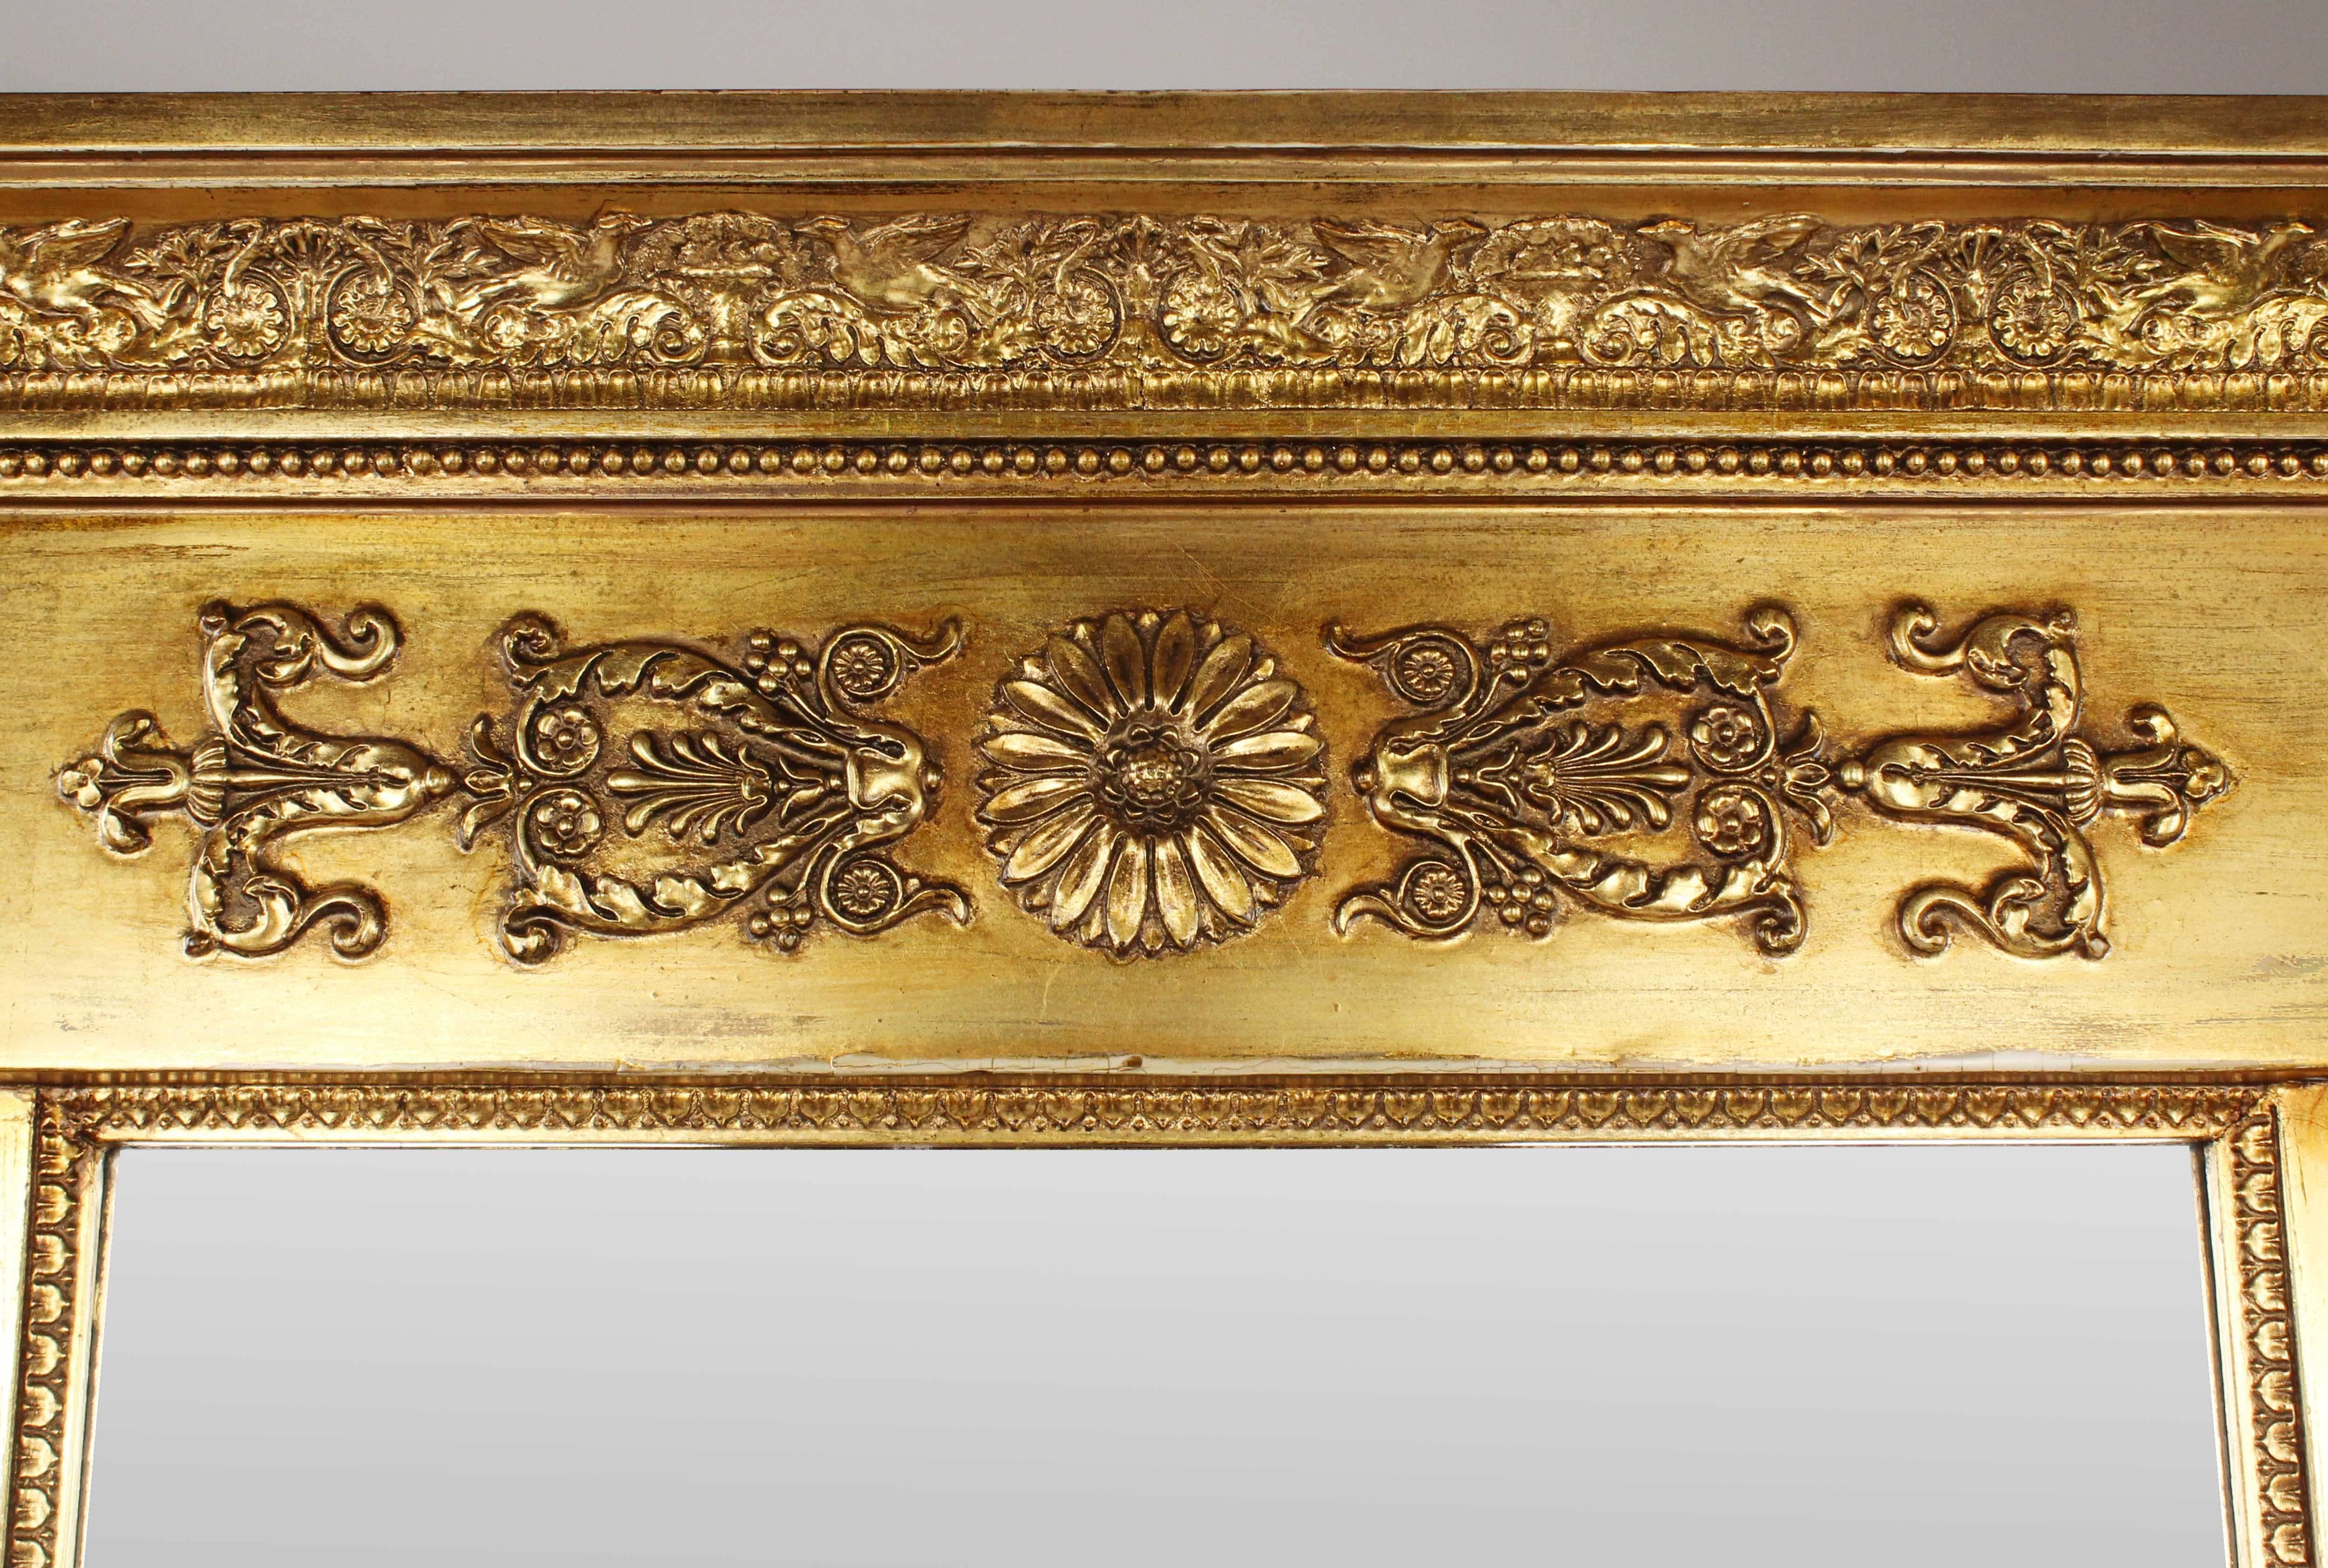 • 19th century pillar mirror
• Empire, circa 1800-1810, Peter Schmuckert 1765-1841 (Mannheim, Germany)
• Wood, golden-colored calm
• Restored state
• Measures: Height 120 cm, width 76 cm, depth 10 cm

Delivery can be made to your door within 7